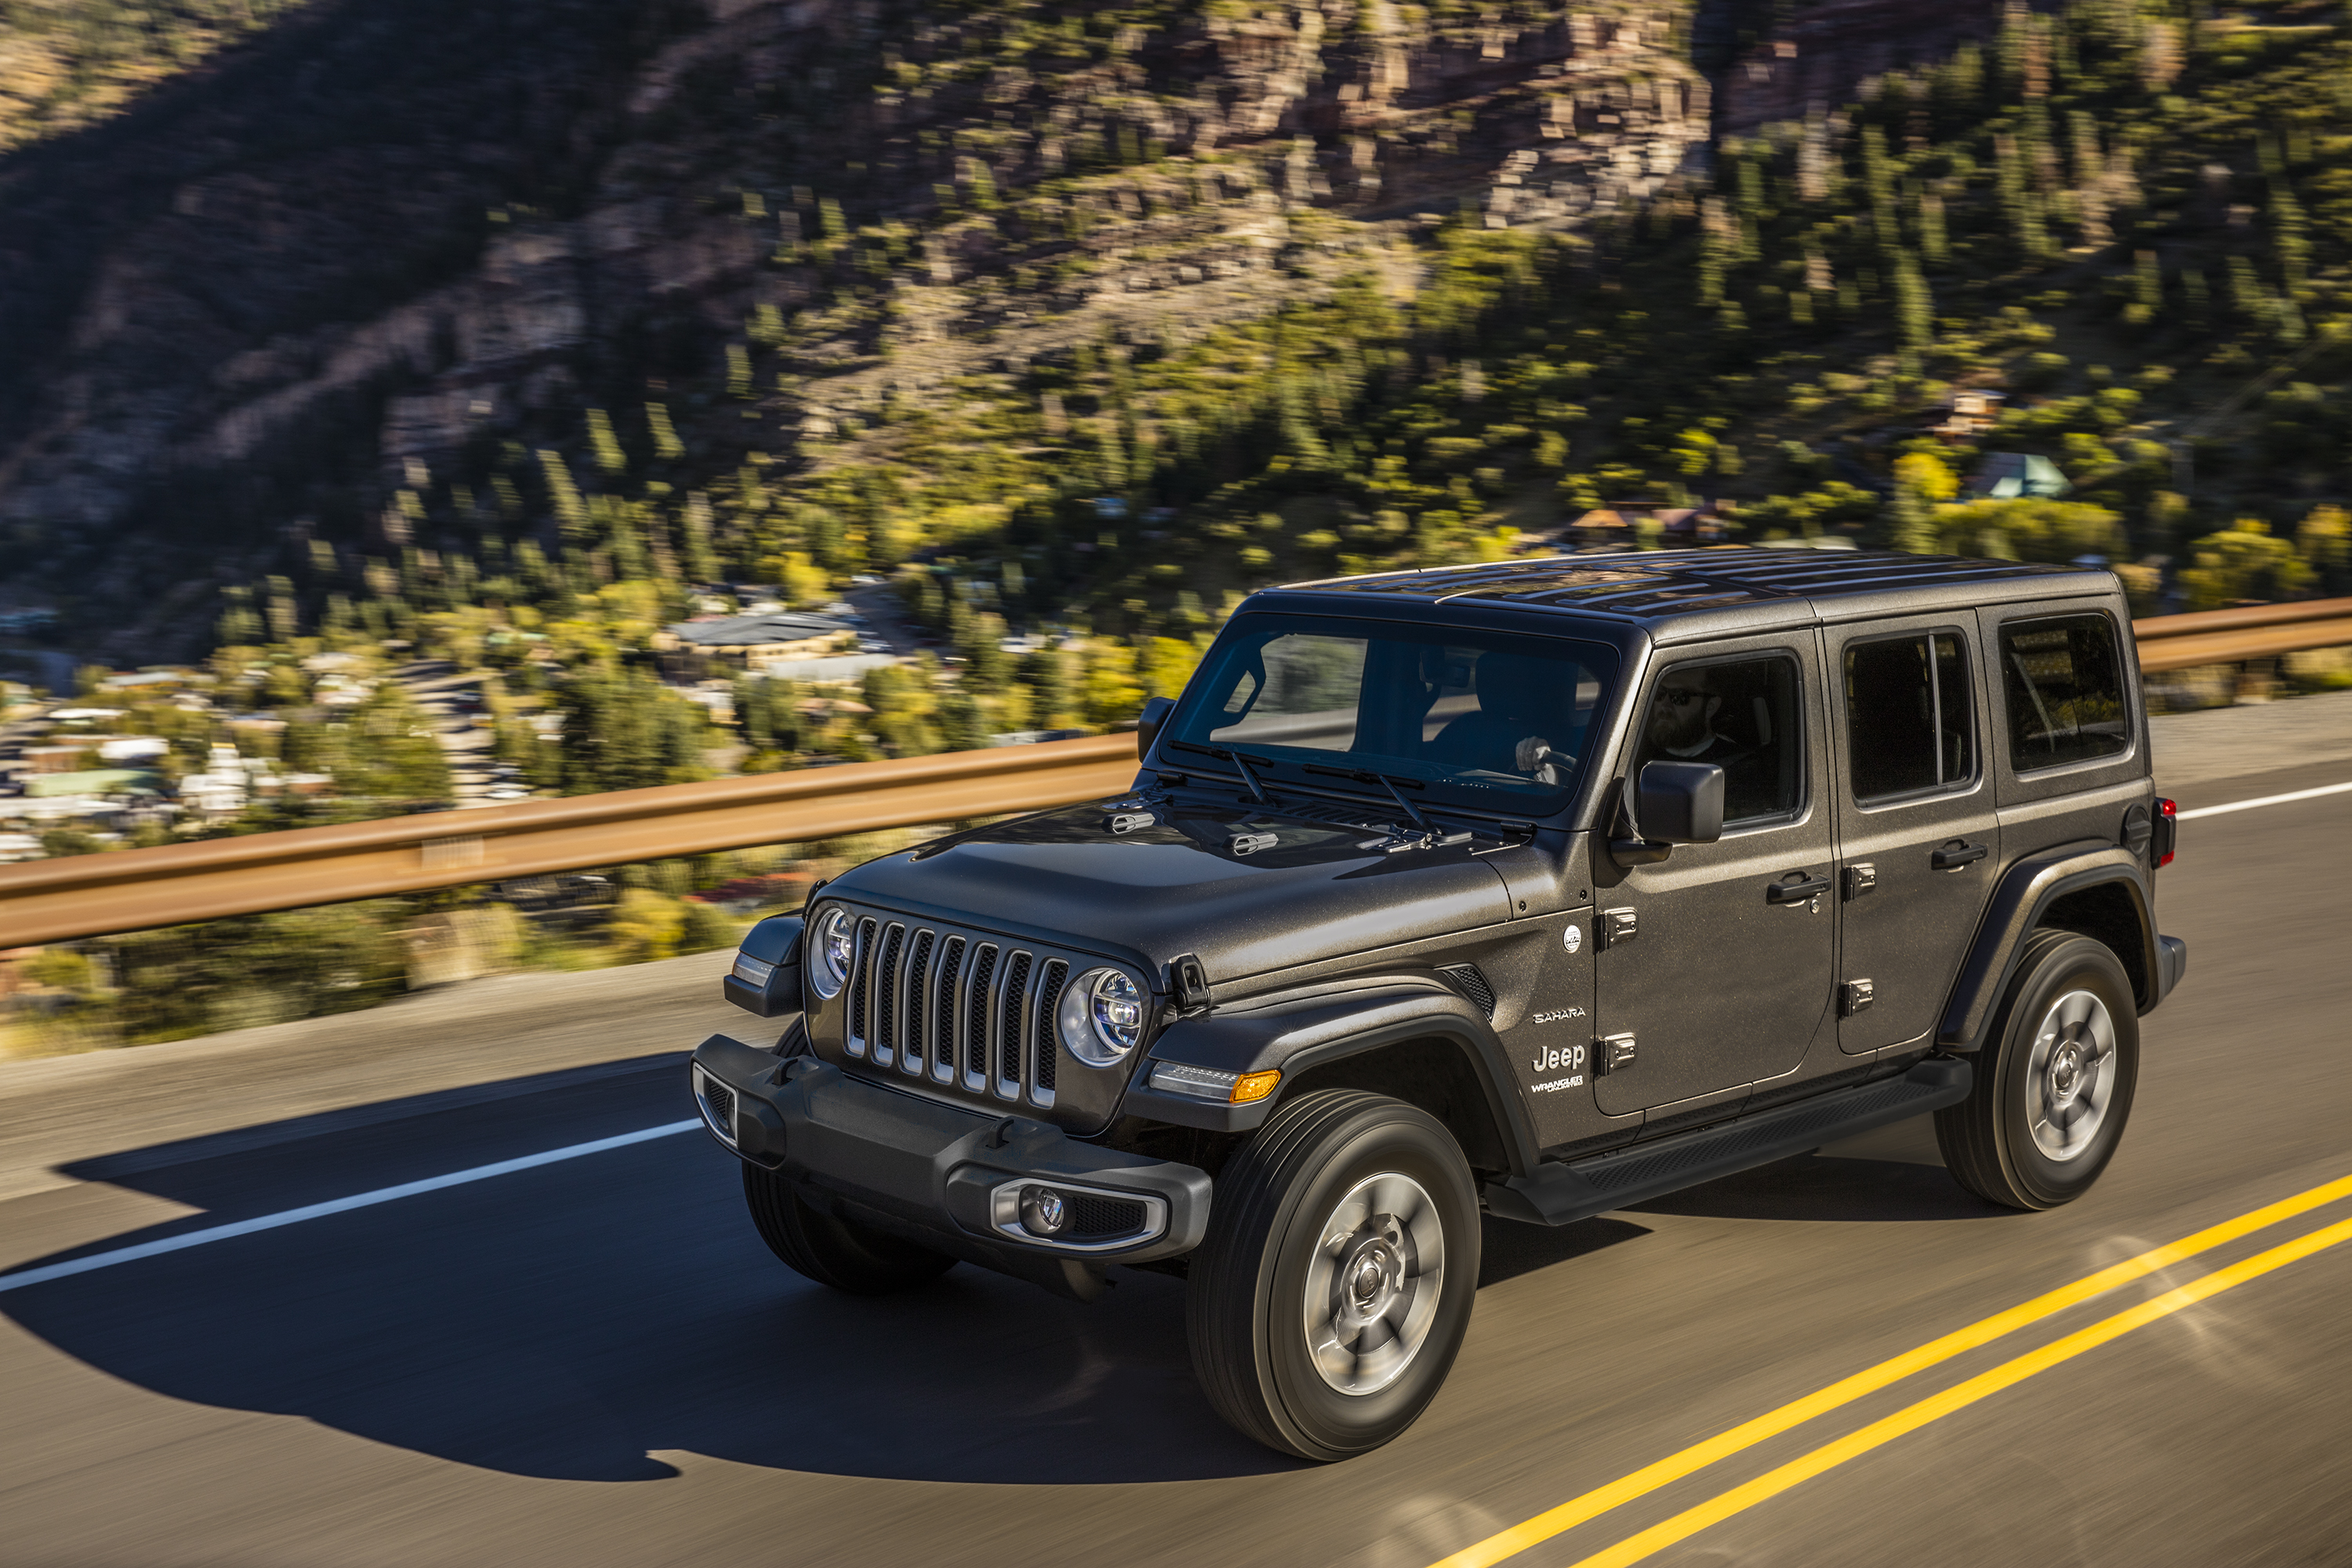 What Features Come Standard on the Jeep Wrangler?